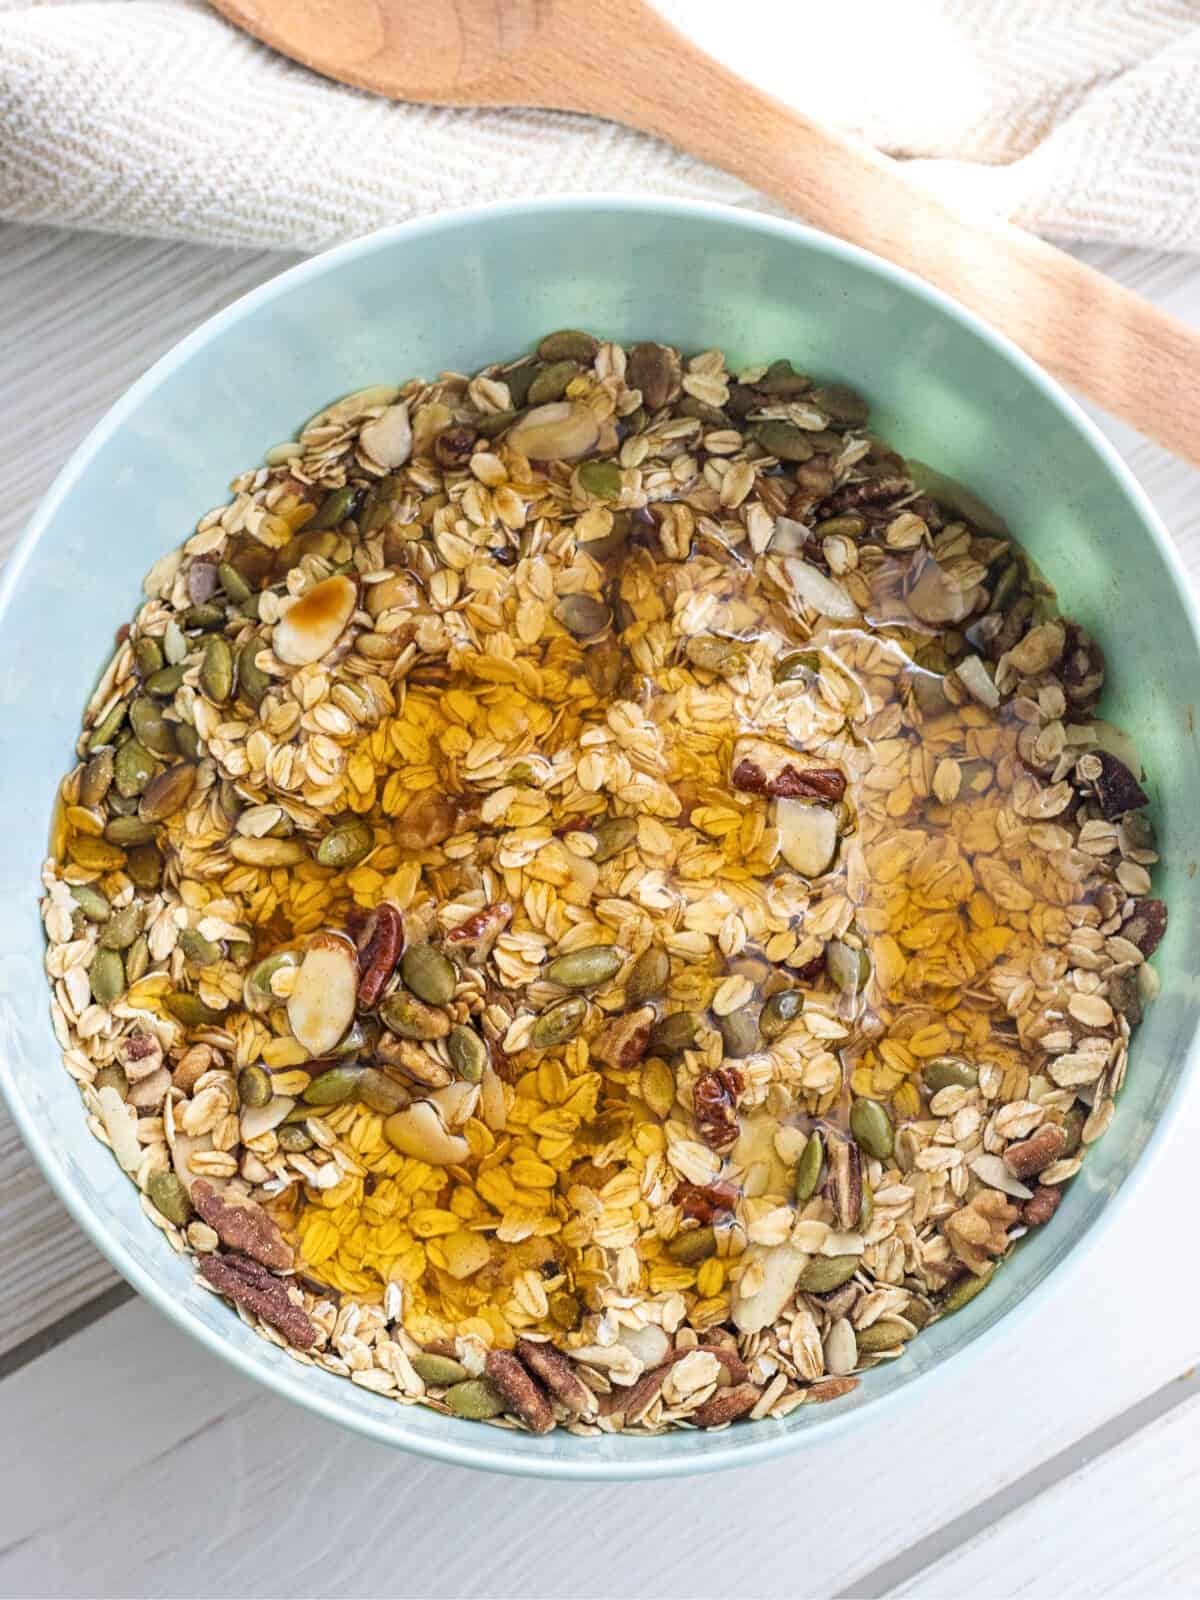 Honey, vanilla, and oil on top of oats, pumpkin seeds, and nuts in a bowl.